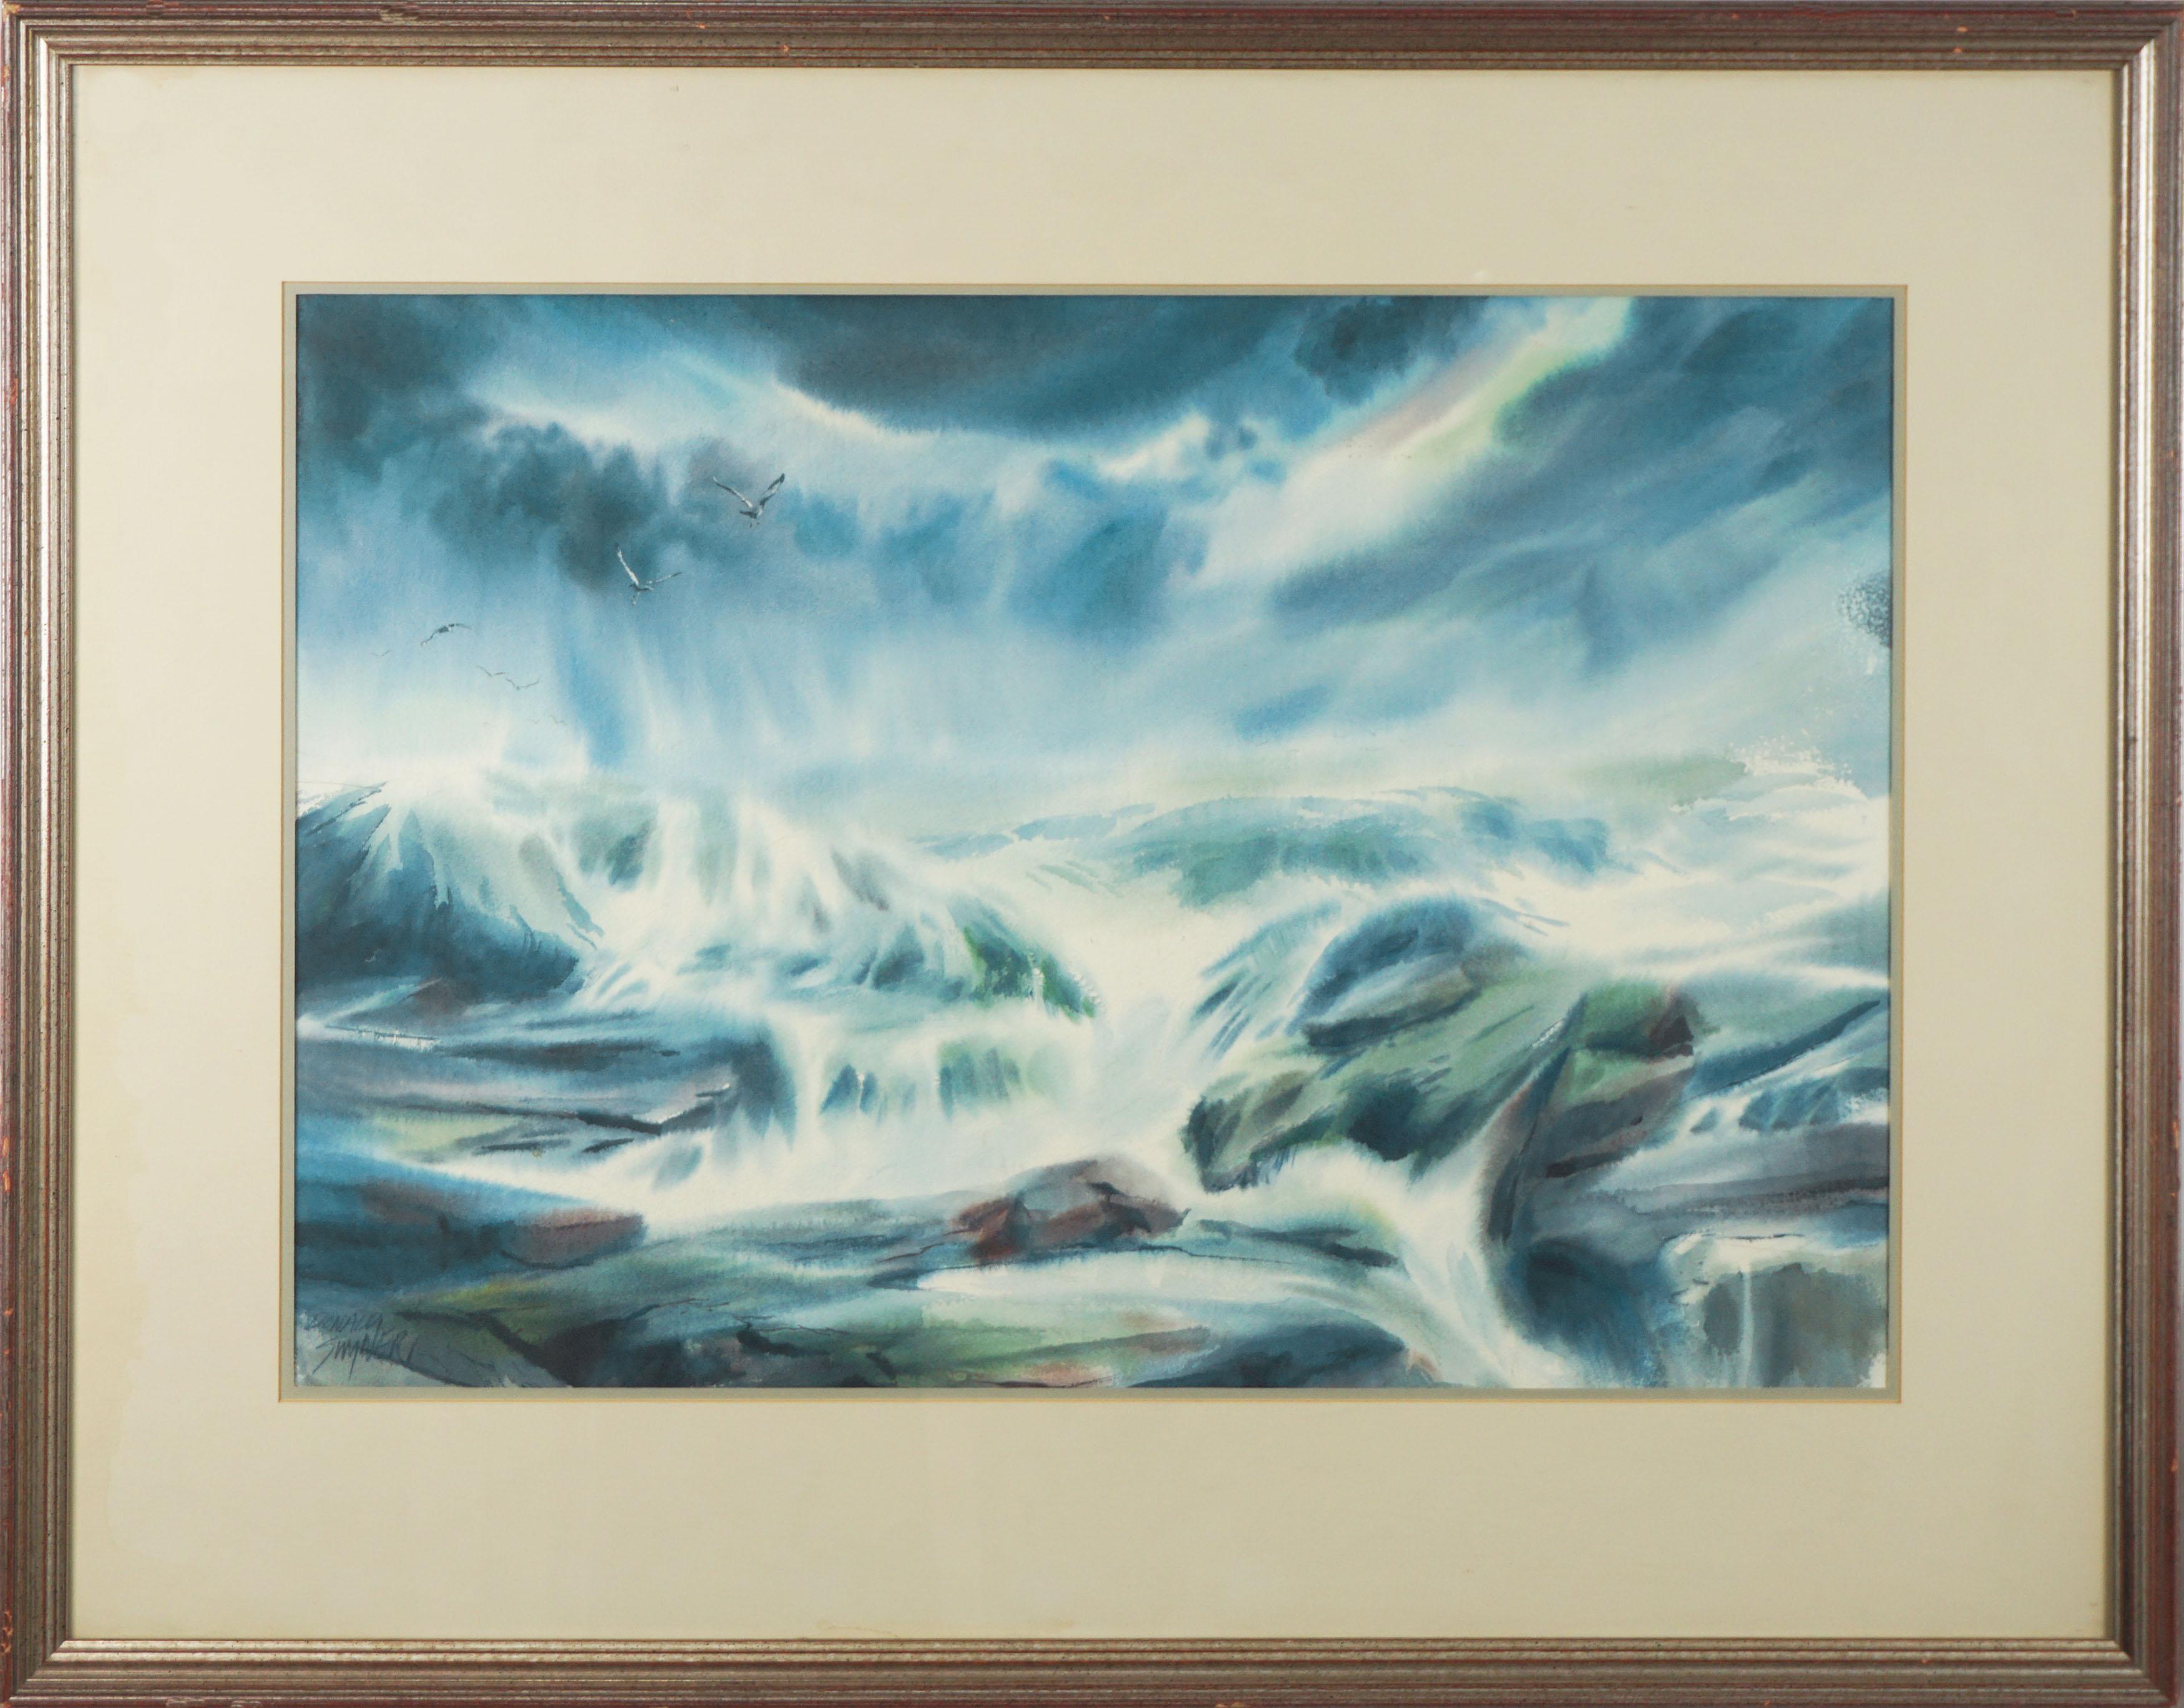 Waves Over Rocks Seascape and Seagulls - Art by Donald Swyner